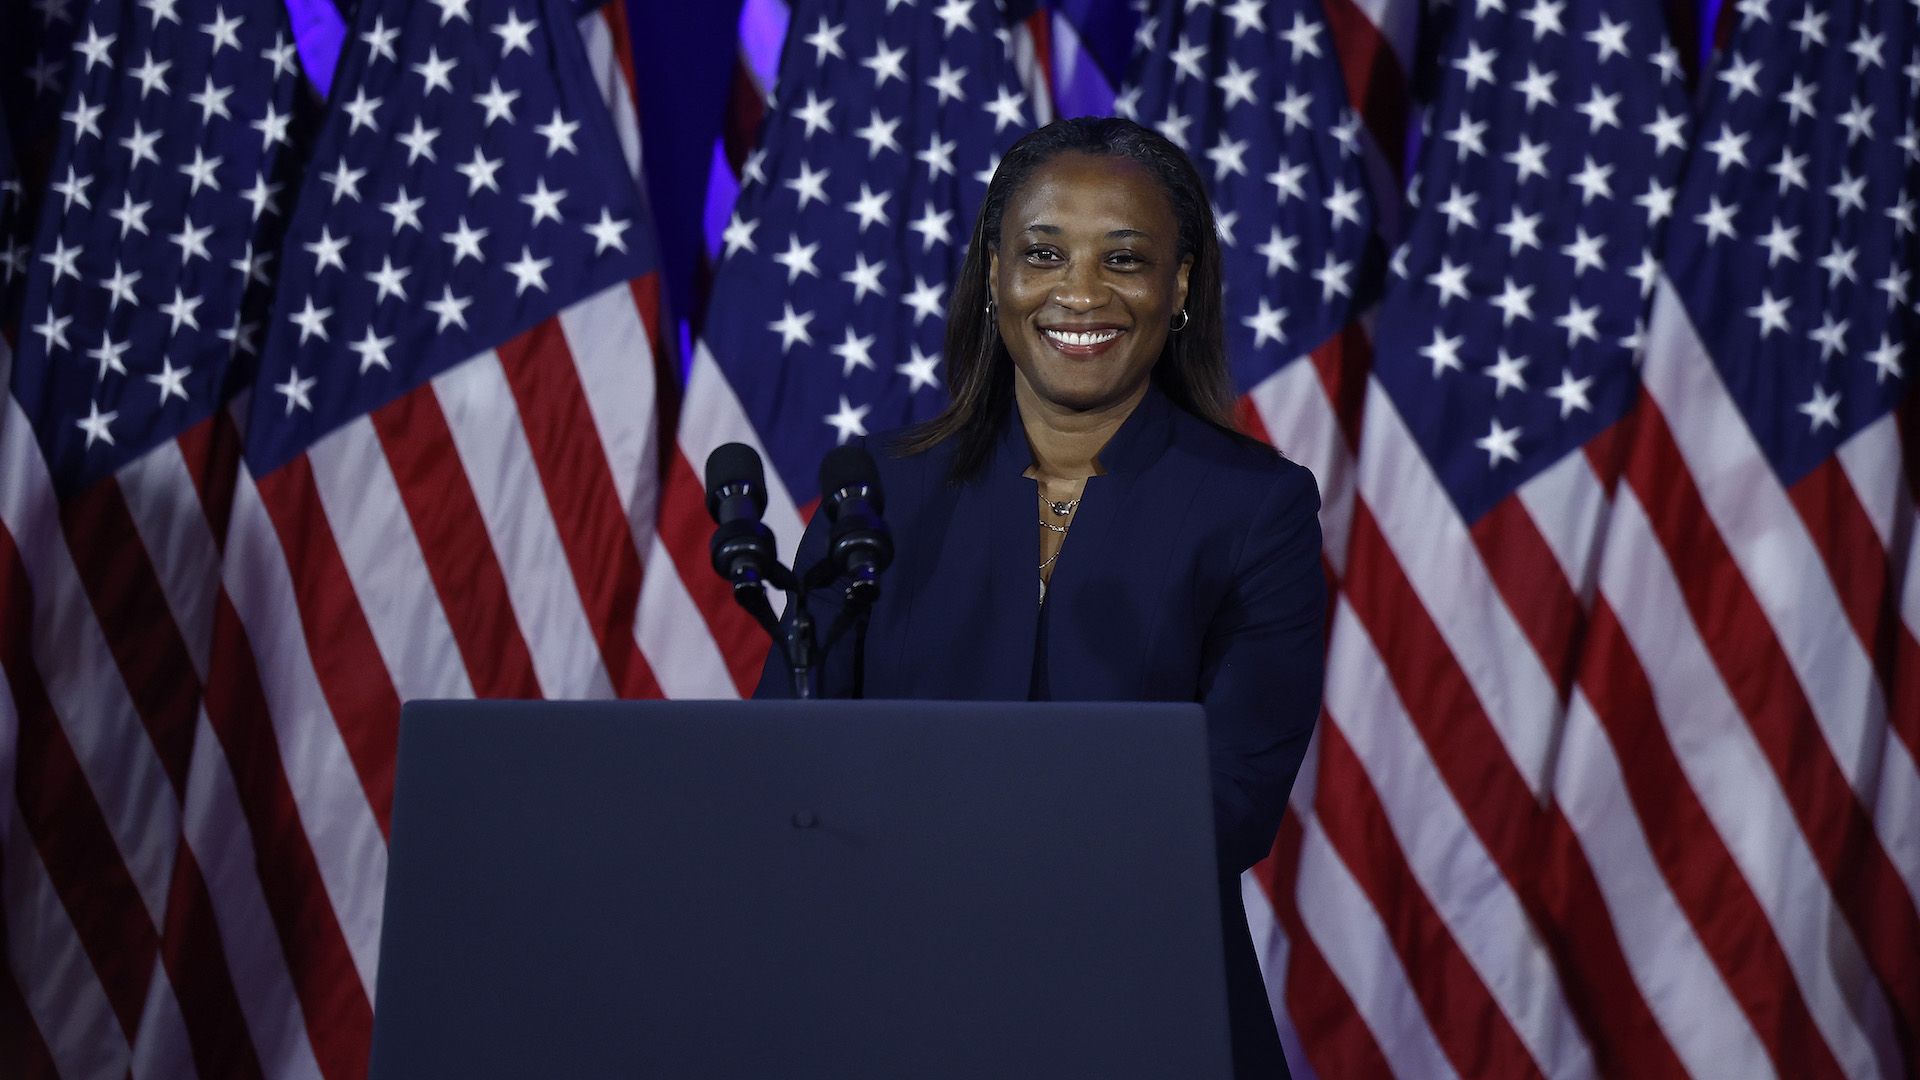 A Black woman in a navy suit stands at a podium smiling with American flags on stage behind her. 